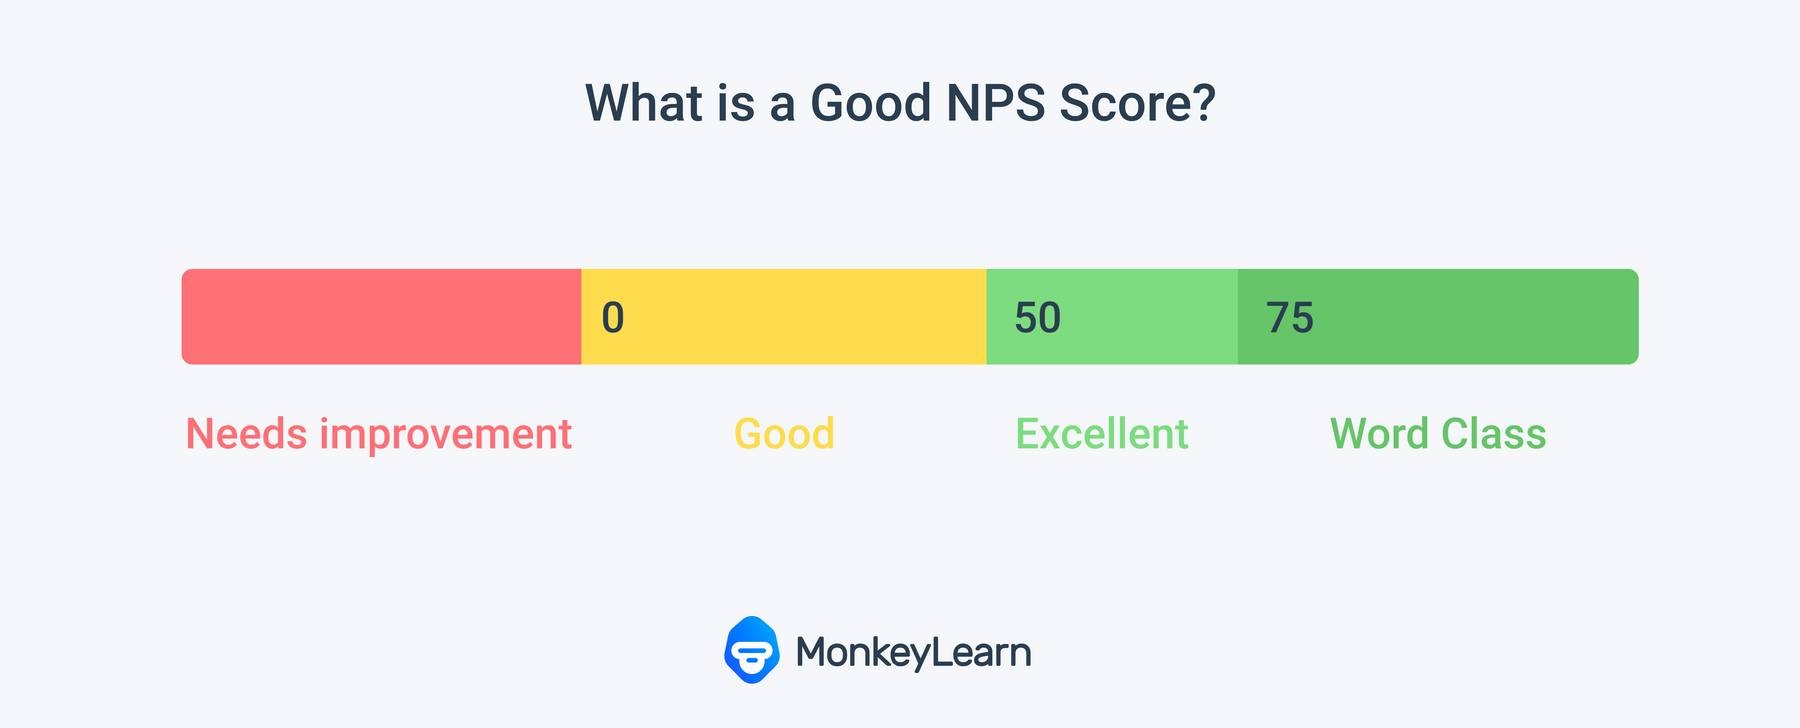 NPS bar scale titled “What is a good NPS score?”. The scale is from -100 to +100. The red section is labeled as “NEEDS IMPROVEMENT” (from -100 to 0), the yellow section is labeled as “Good” (from 0 to +30), the light green section is labeled as “GREAT” (from +30 to +70), and the dark green section is labeled as “EXCELLENT” (from +70 to +100).